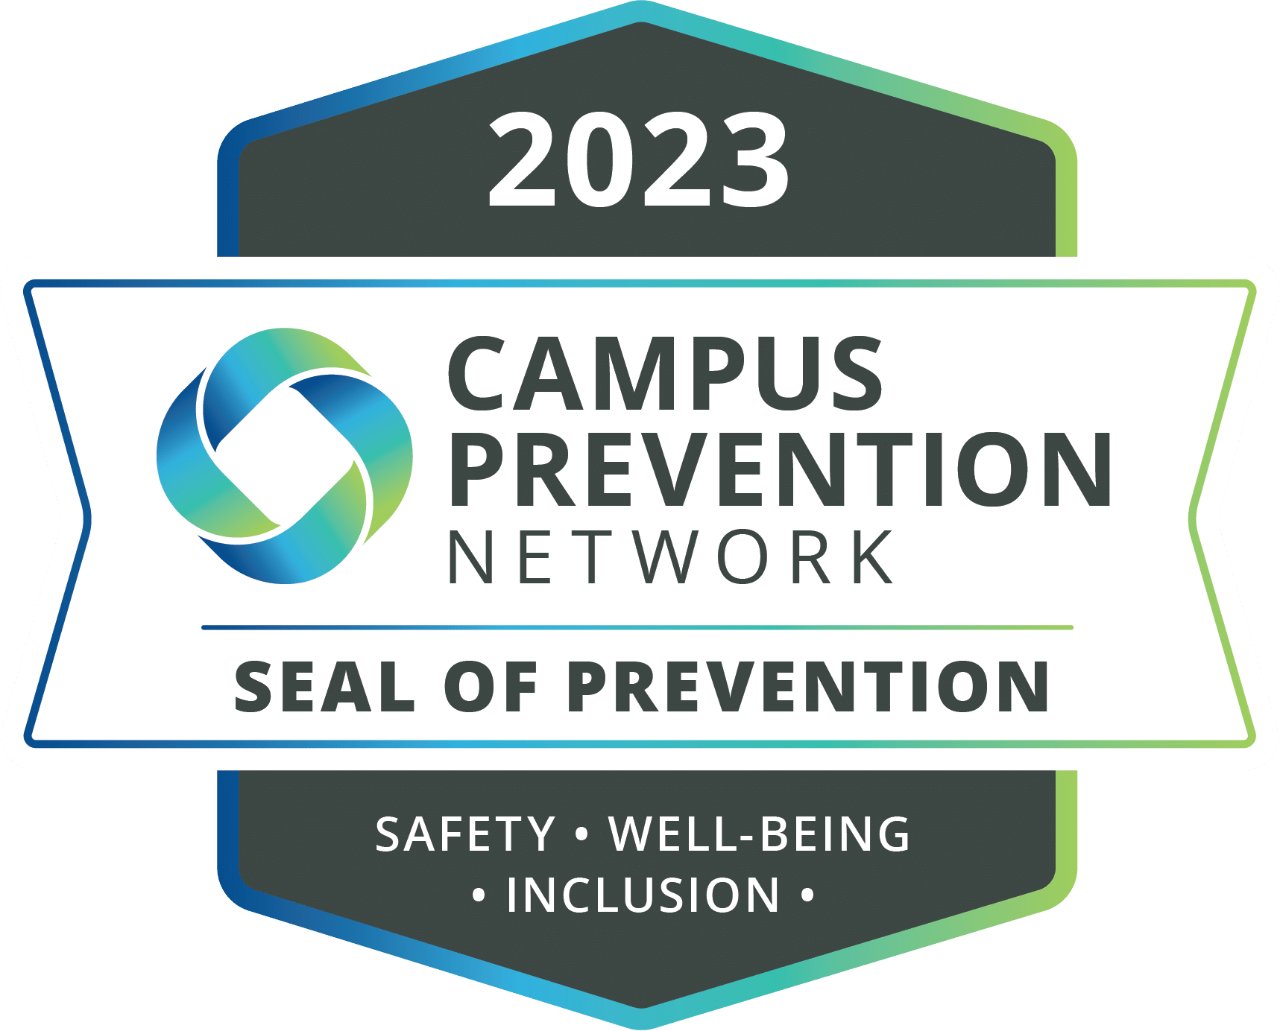 2022 Campus Prevention Network Seal of Prevention